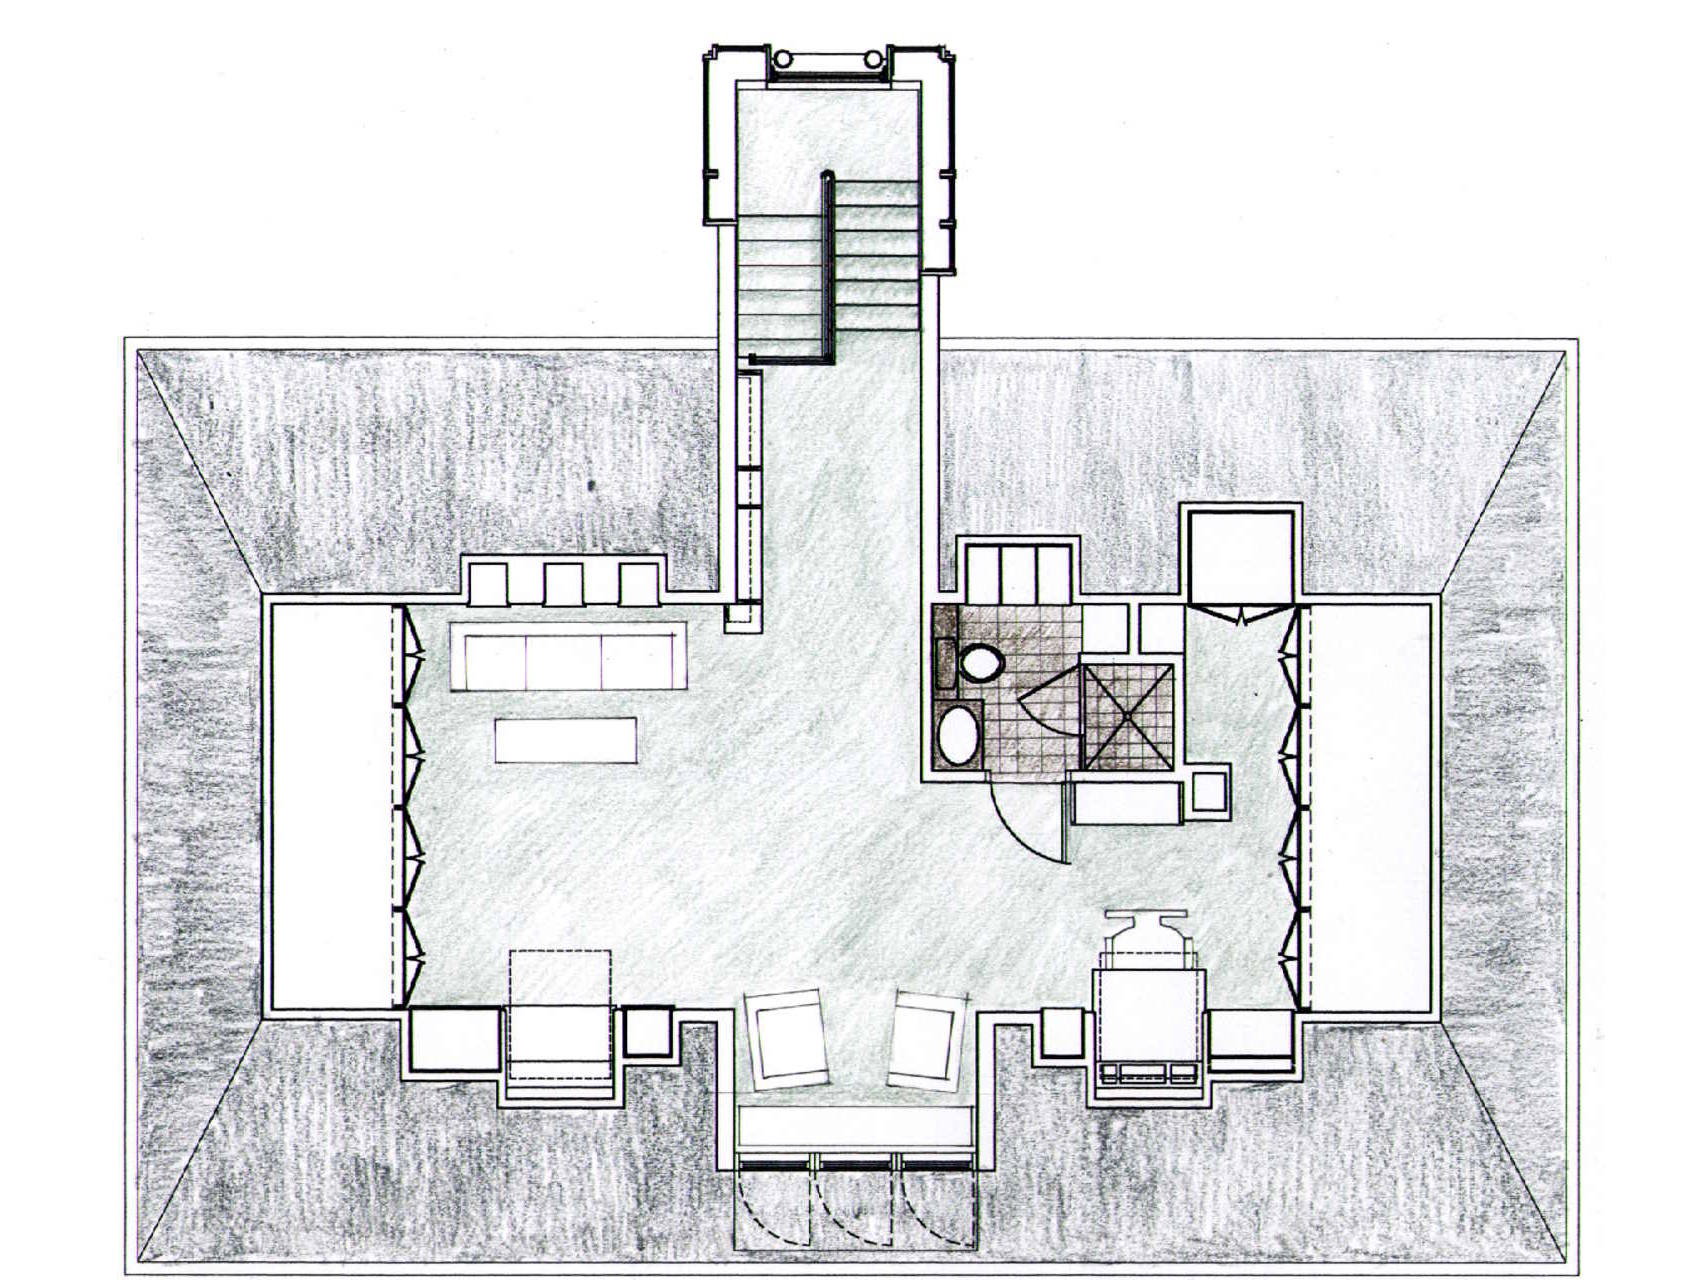 Plan of attic renovation and stair addition